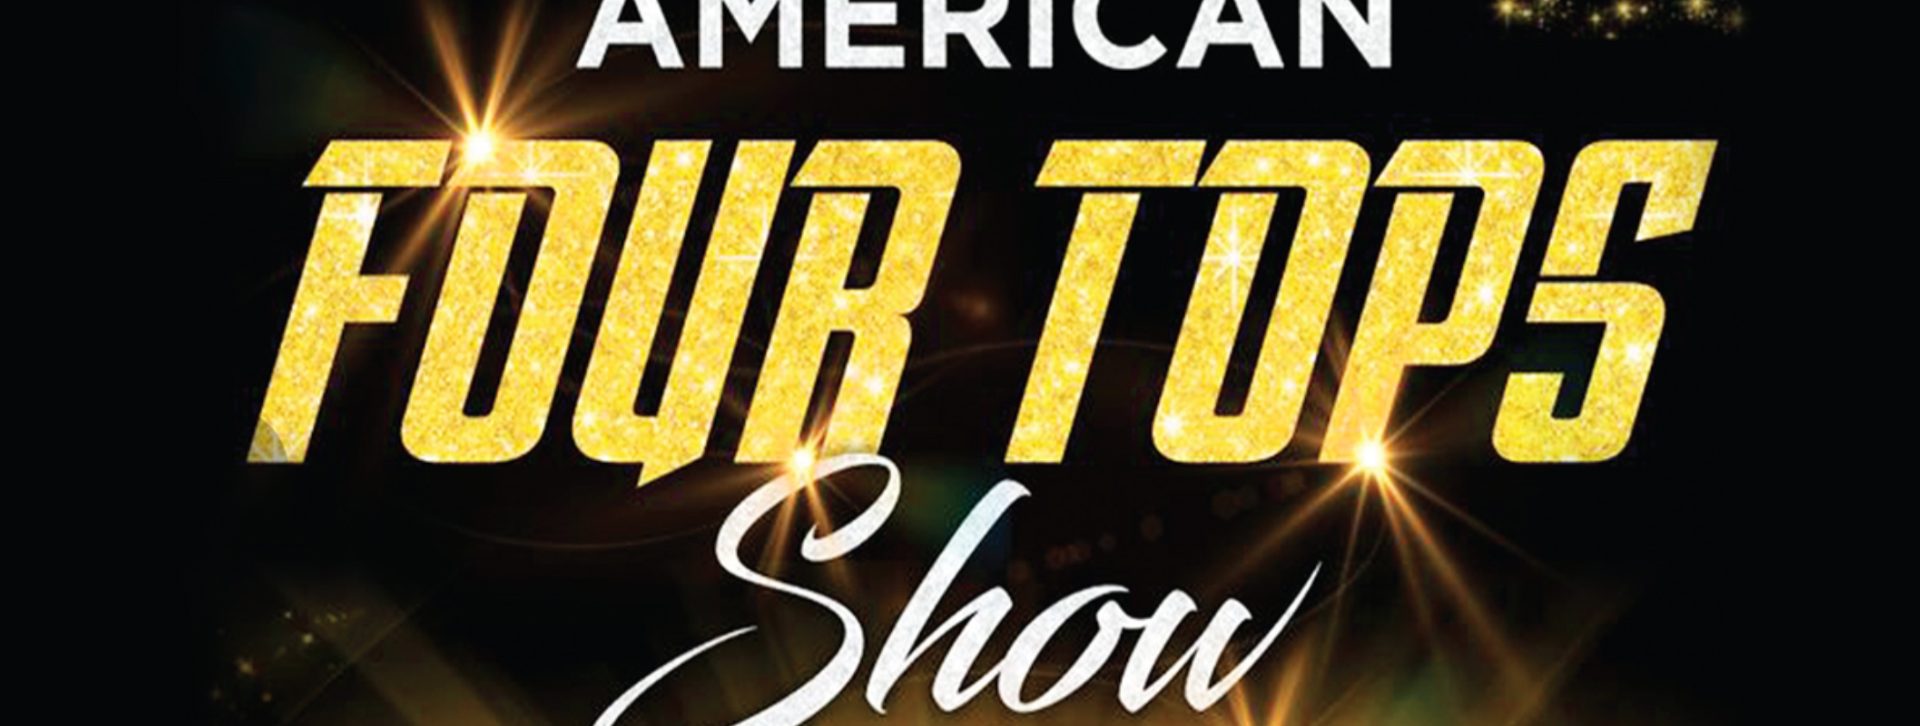 American Four Tops Motown Show